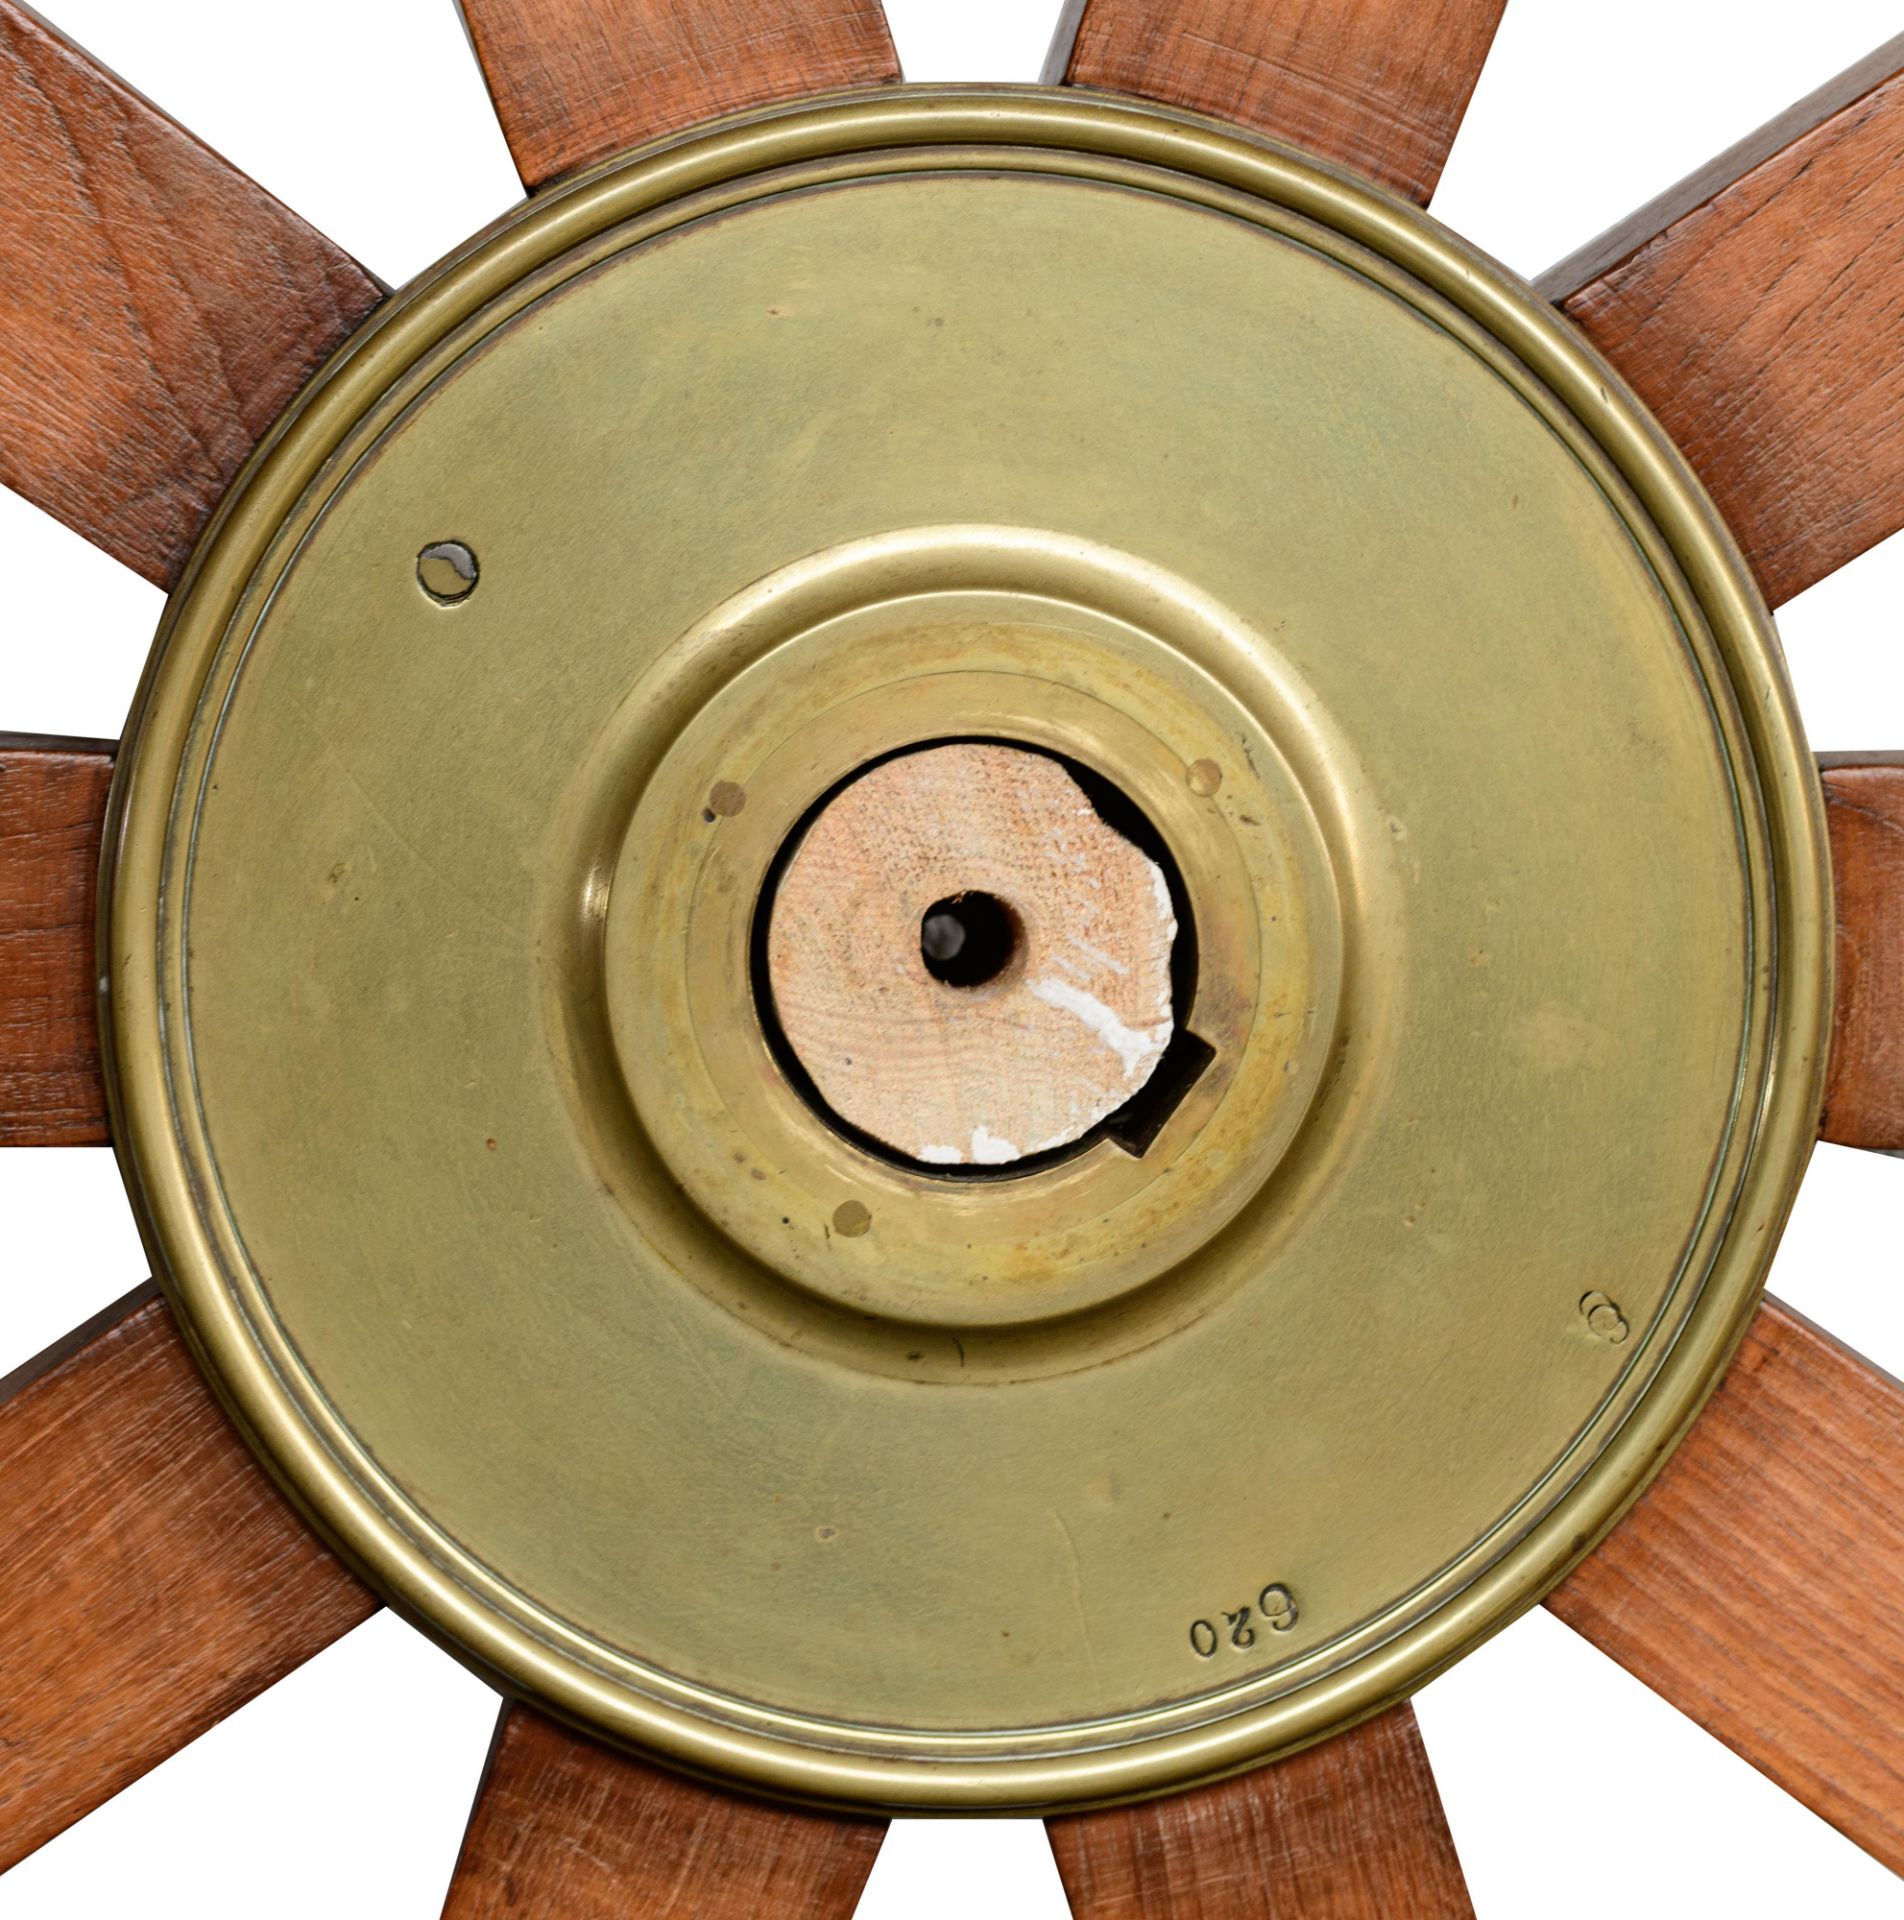 A large and decorative ship's wheel, ø 183 cm - Image 2 of 3